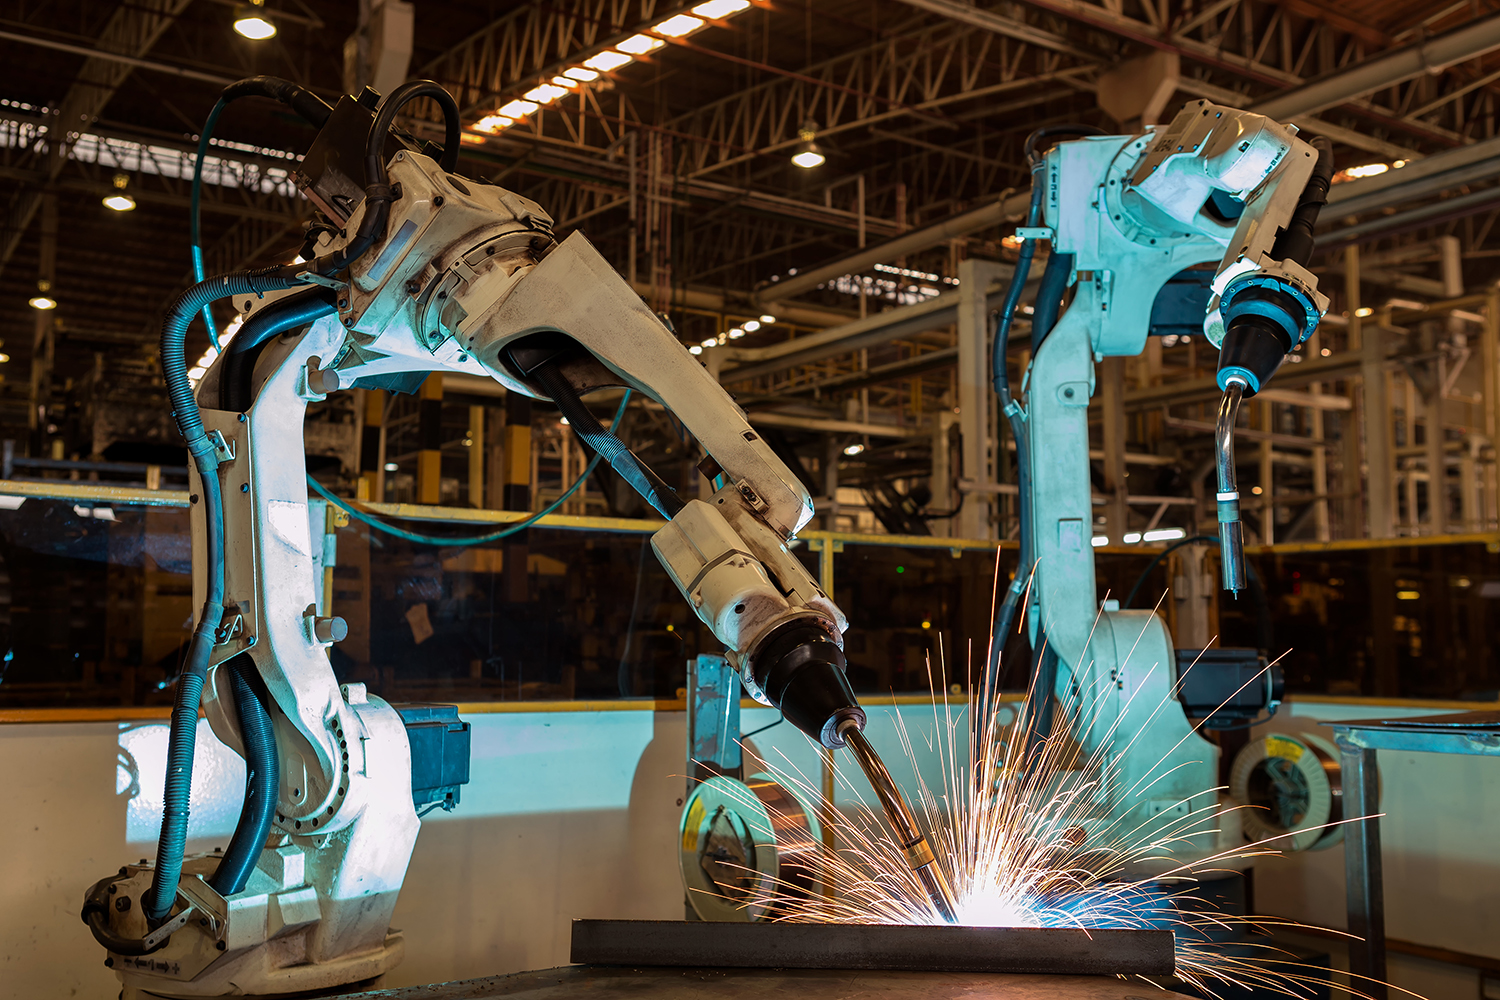 Six-axis robots have become the standard solution for automated assembly tasks due to their ability to carry out complex manoeuvres. (Image Source: AdobeStock bobo1980 / 142370784)